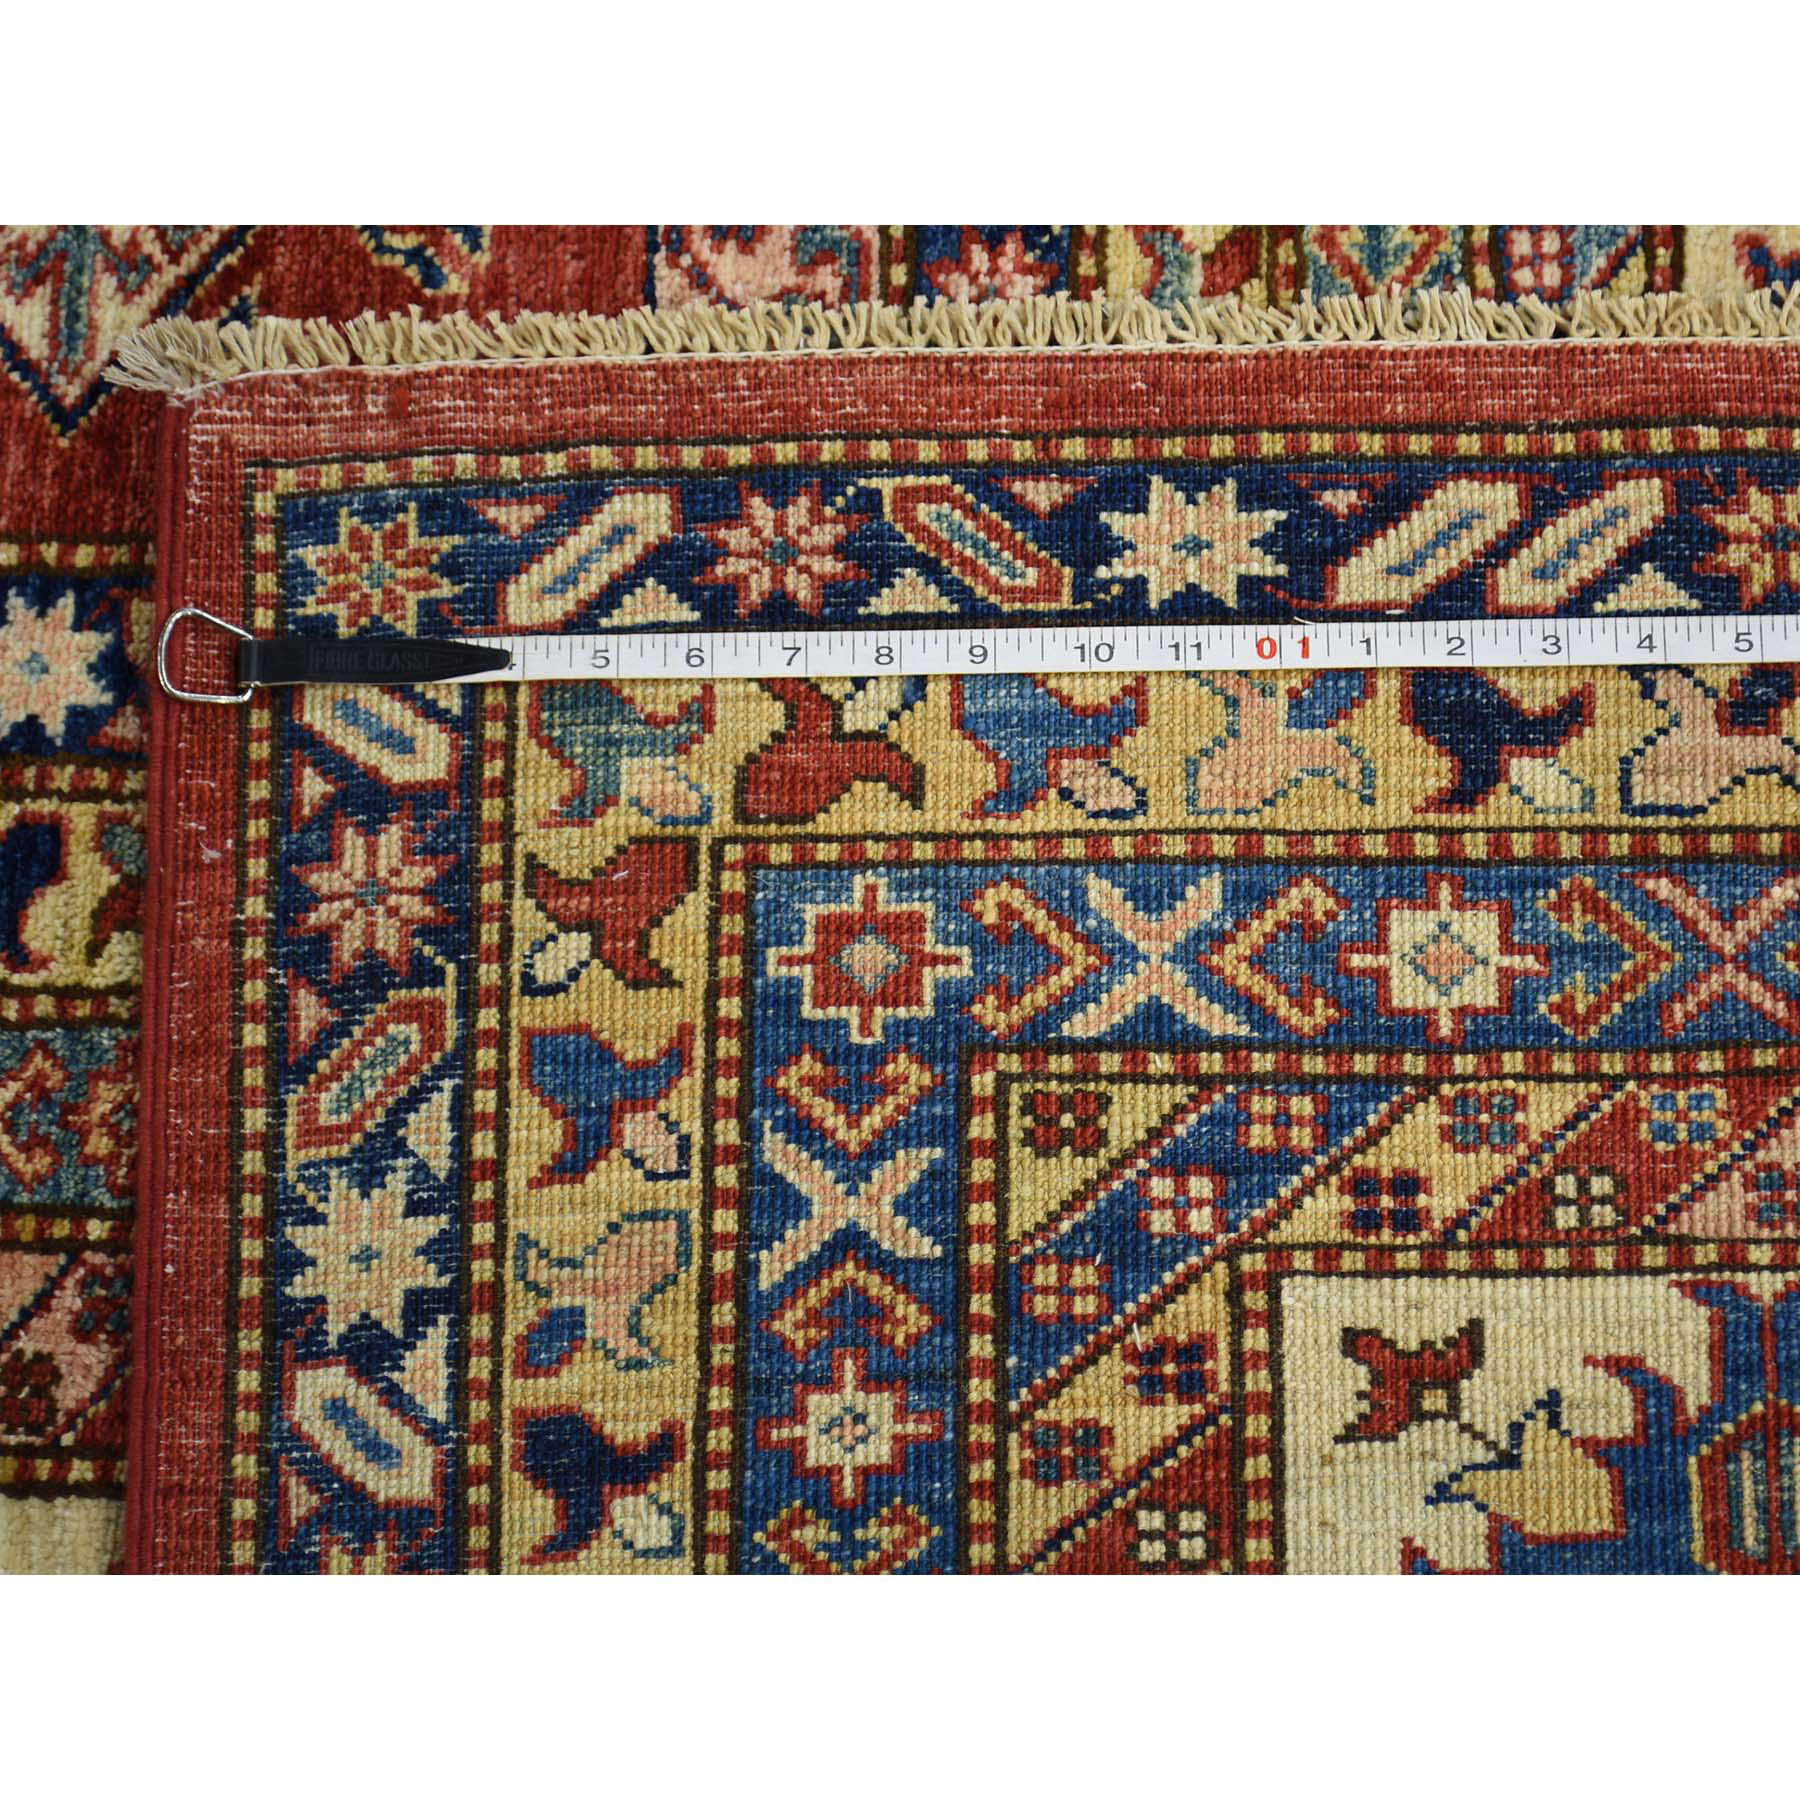 13-2 x13-9  Hand-Knotted Pure Wool Super Kazak Oversized Square Rug 